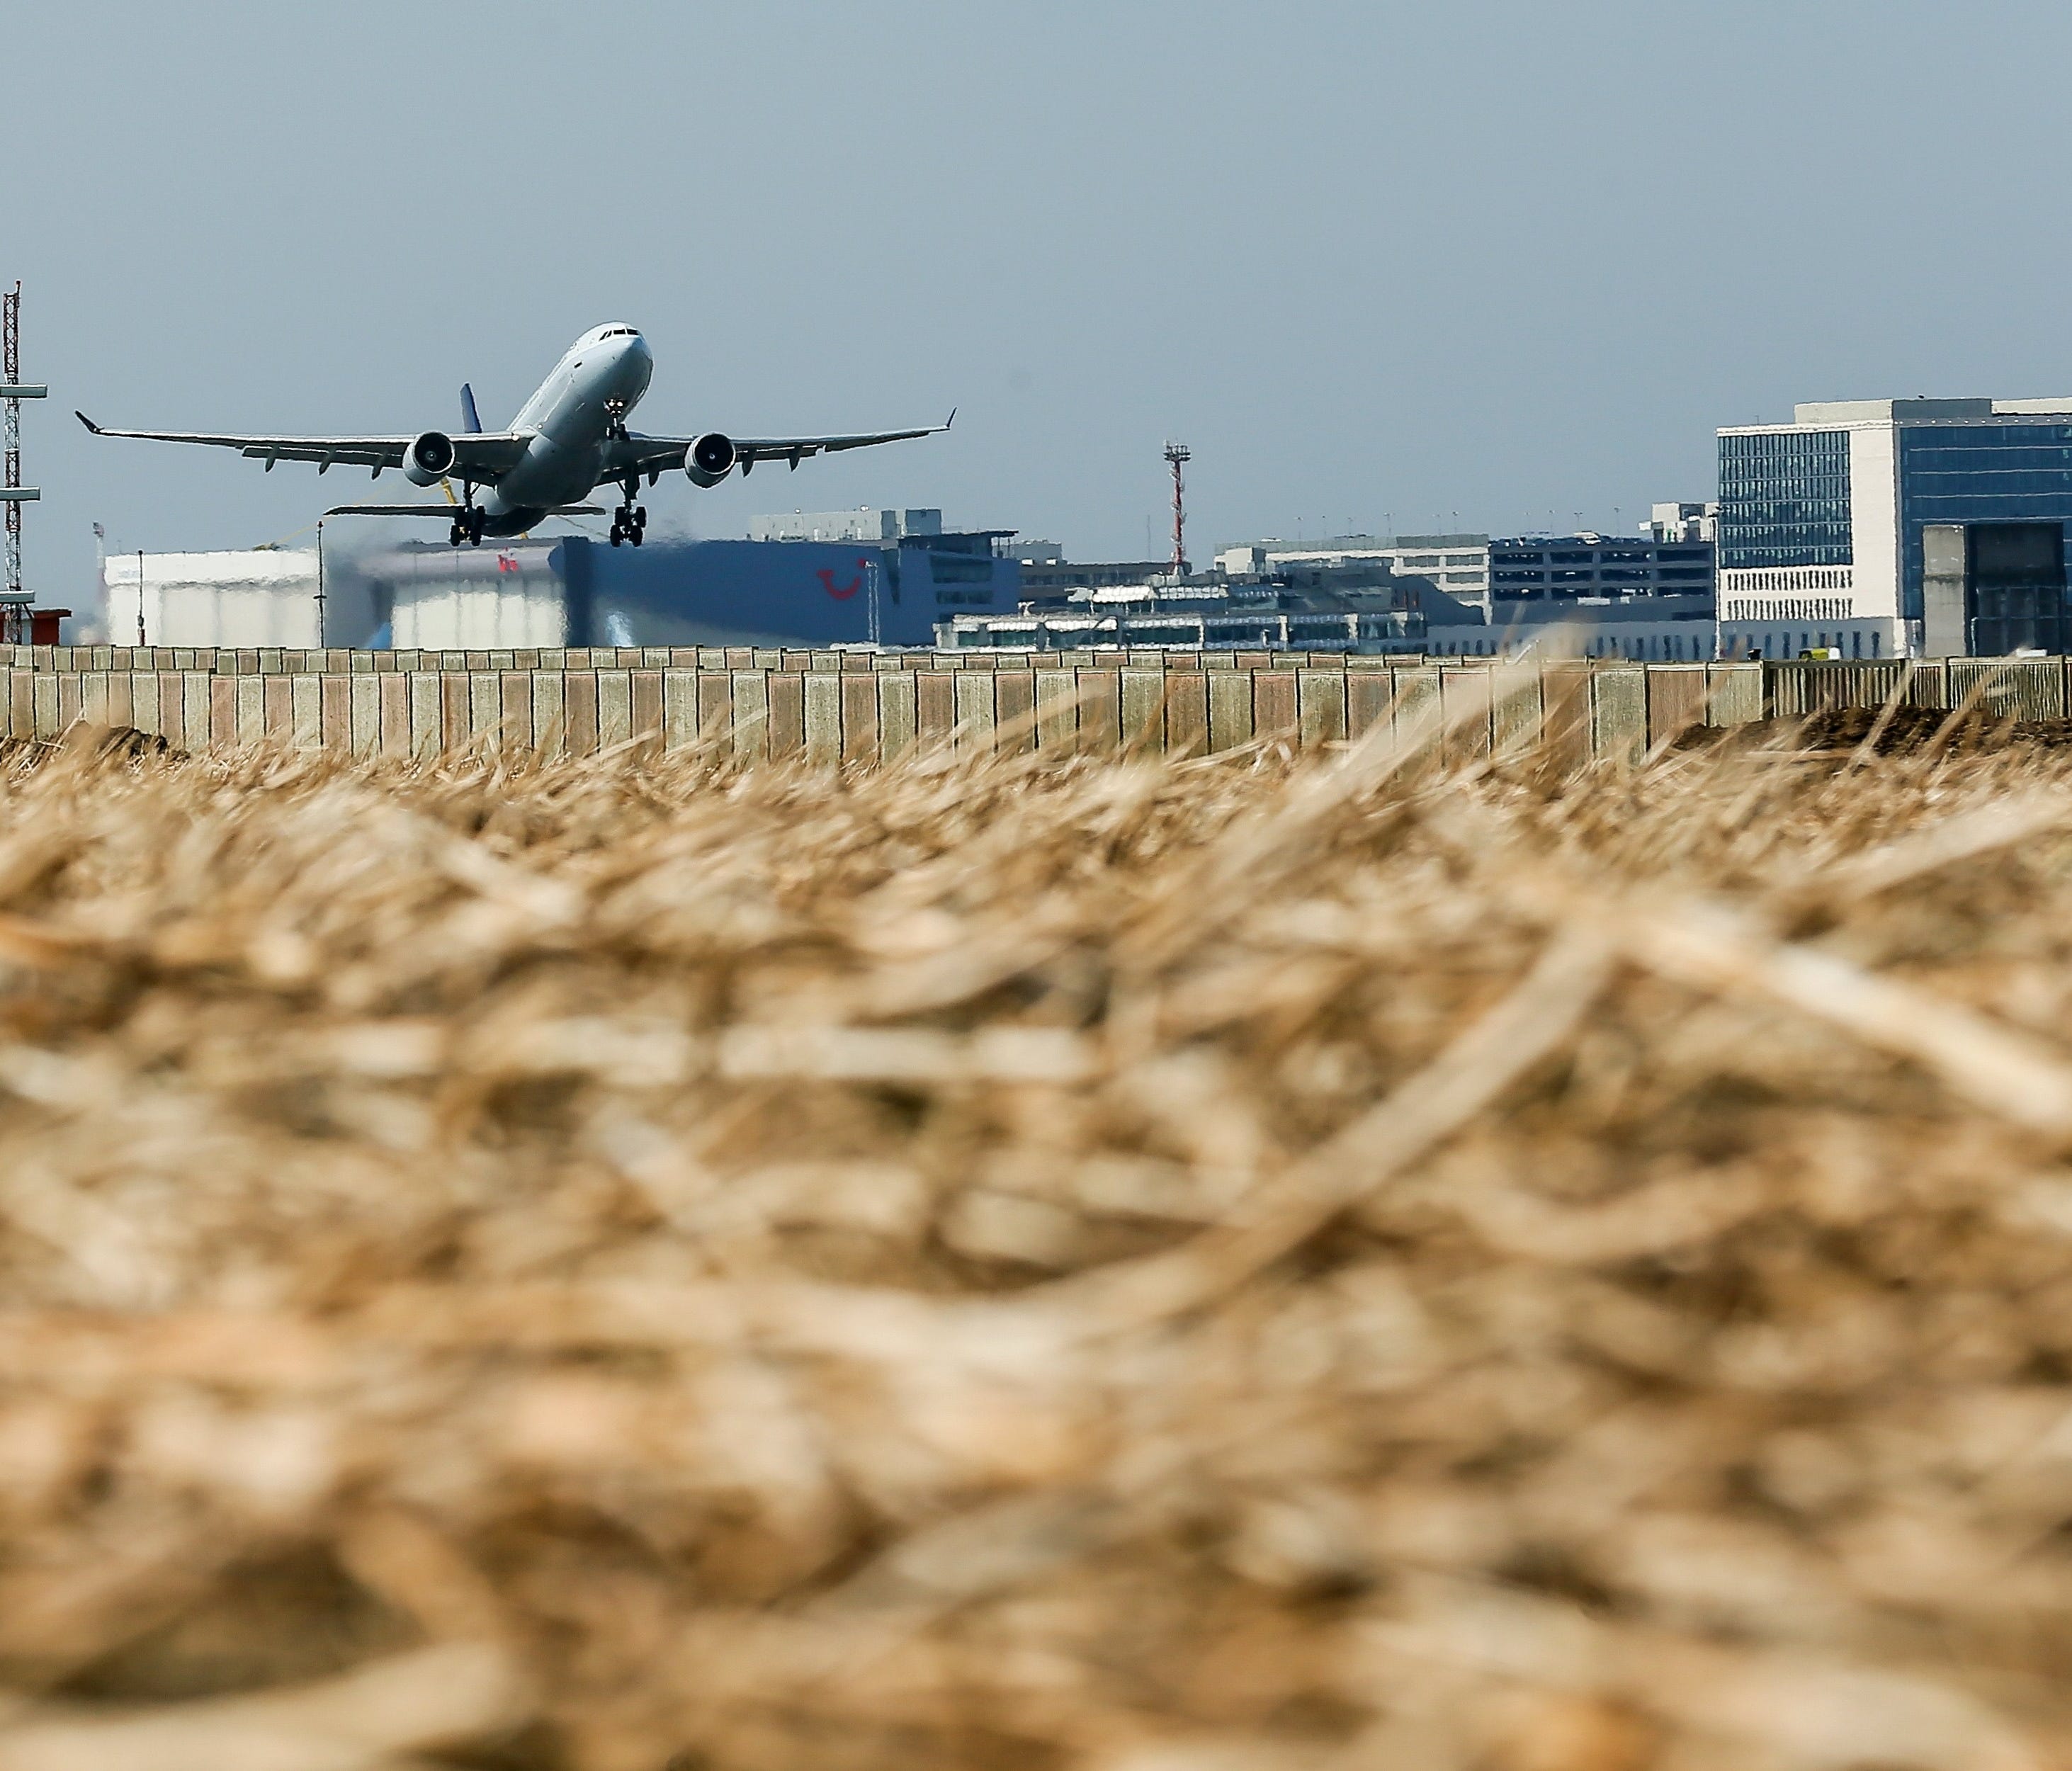 A Brussels Airlines plane takes off at Brussels Airport on April 6, 2018.